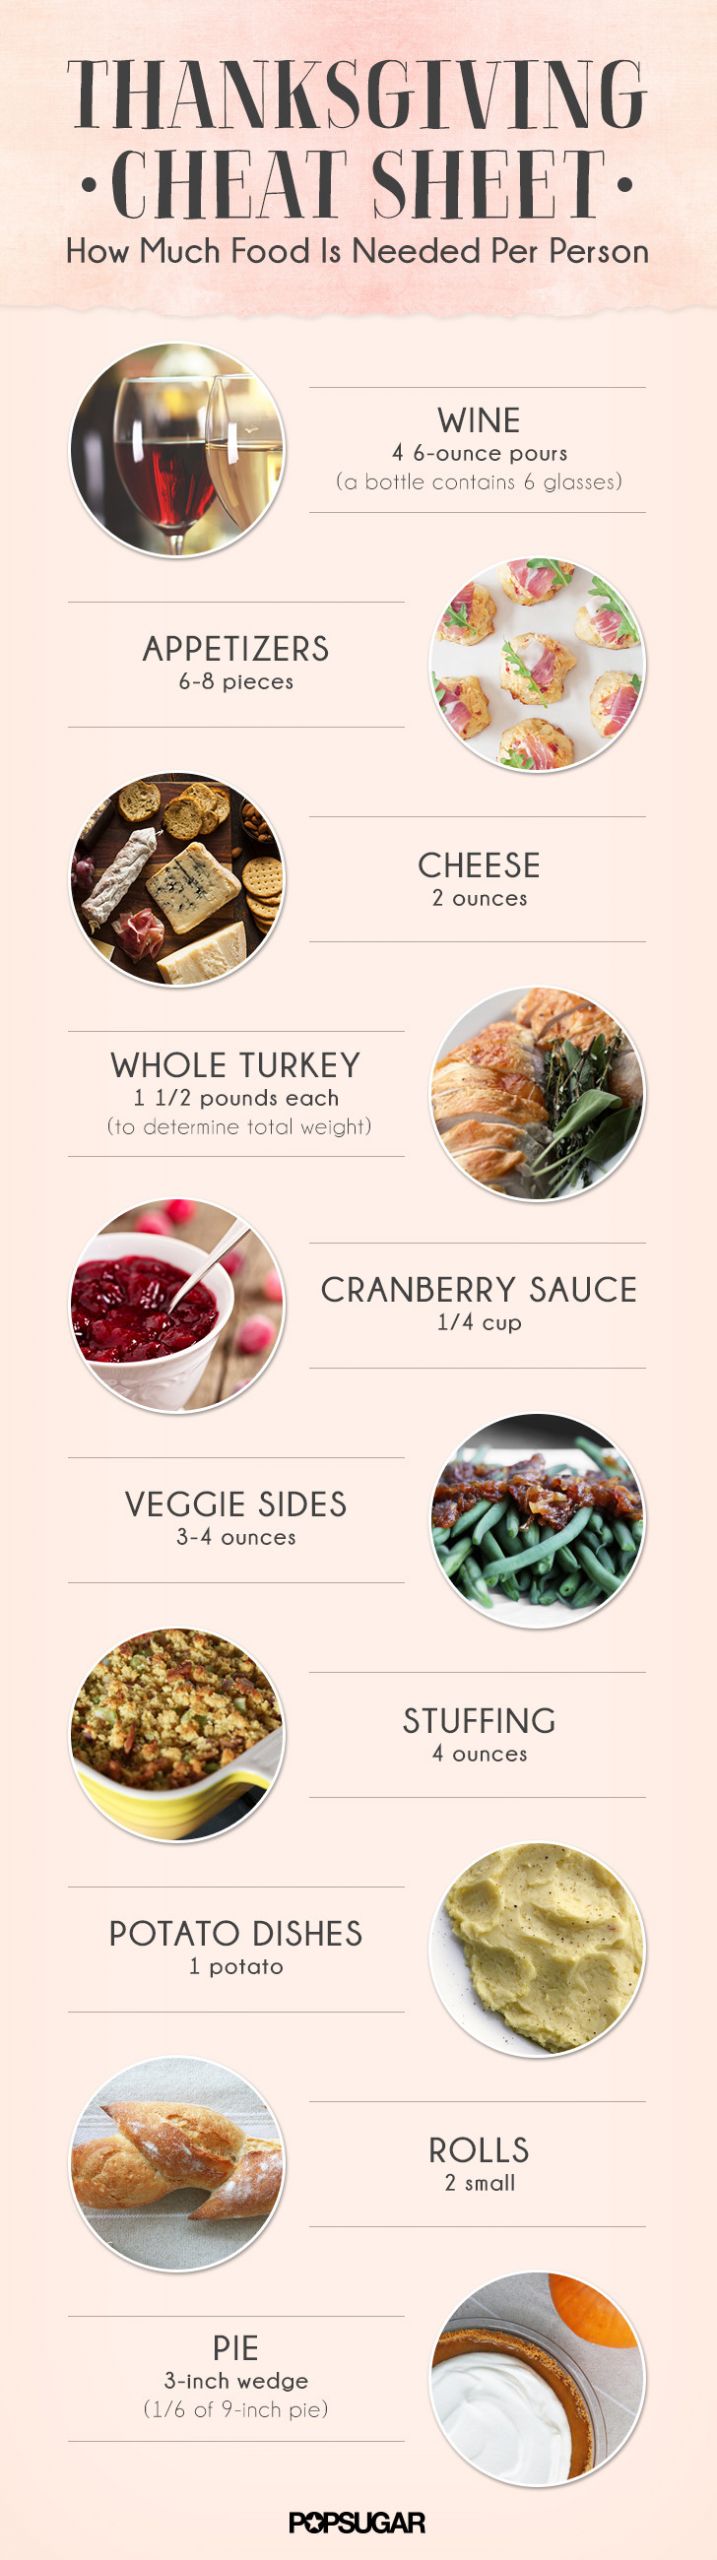 Thanksgiving Food Calculator
 How to Calculate How Much to Make For Thanksgiving